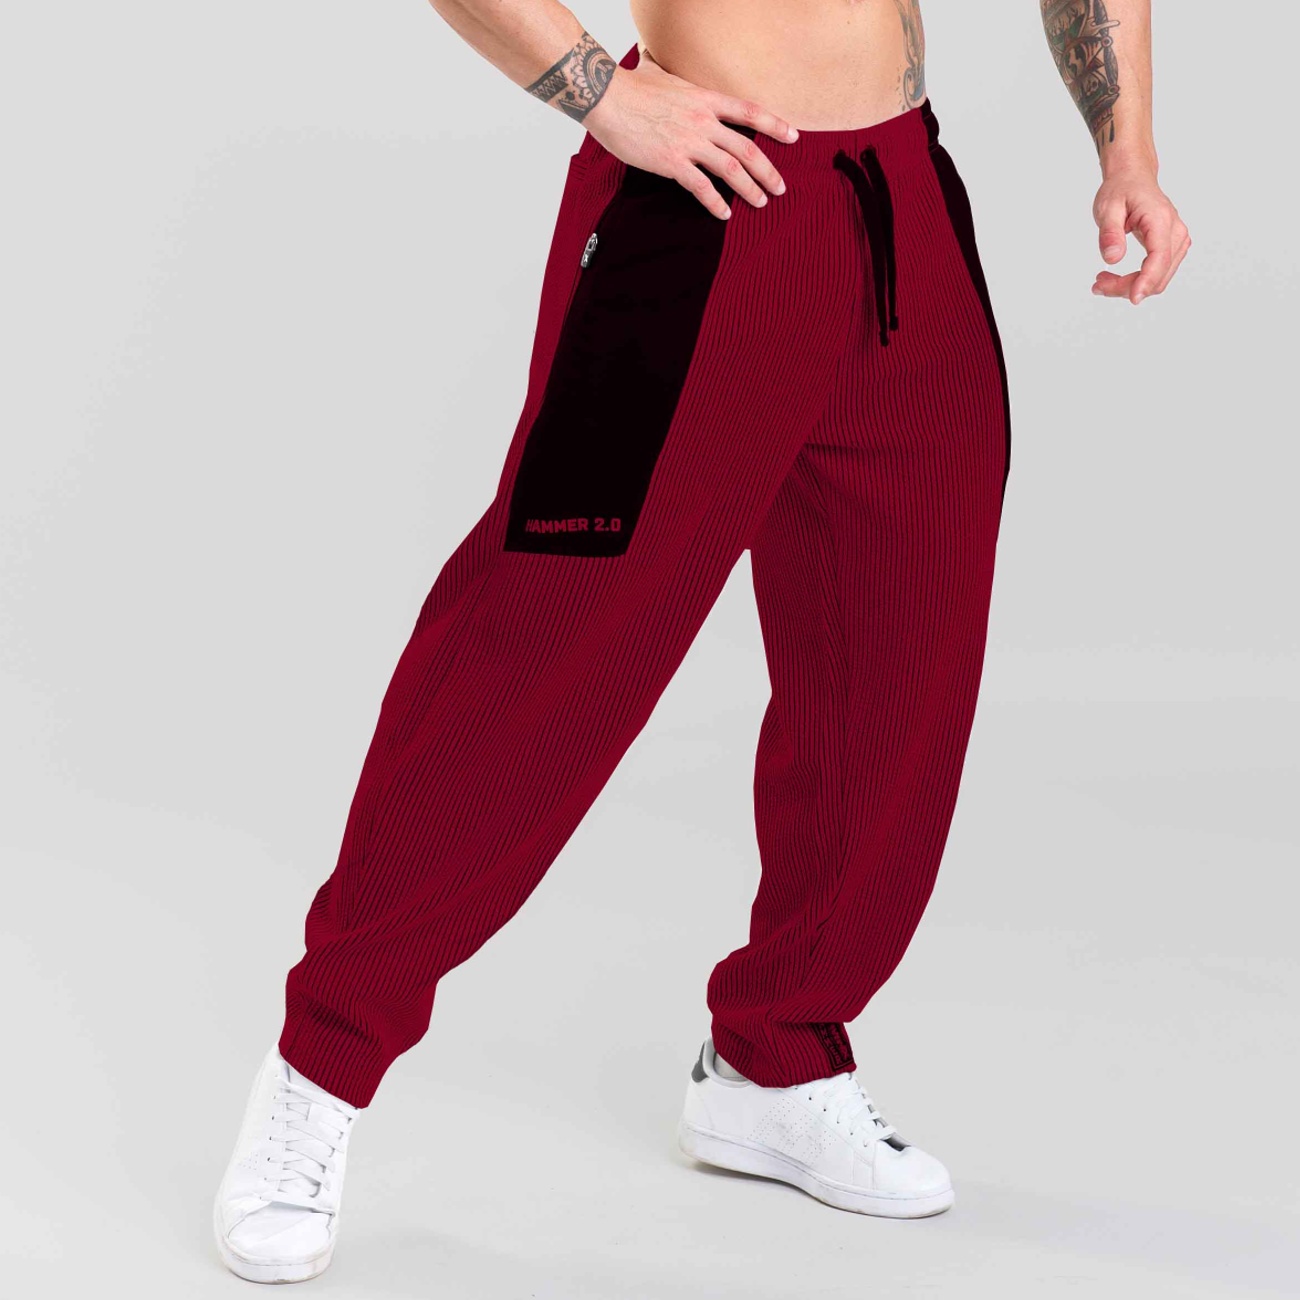 HAMMER-PANTS-02-RED-2